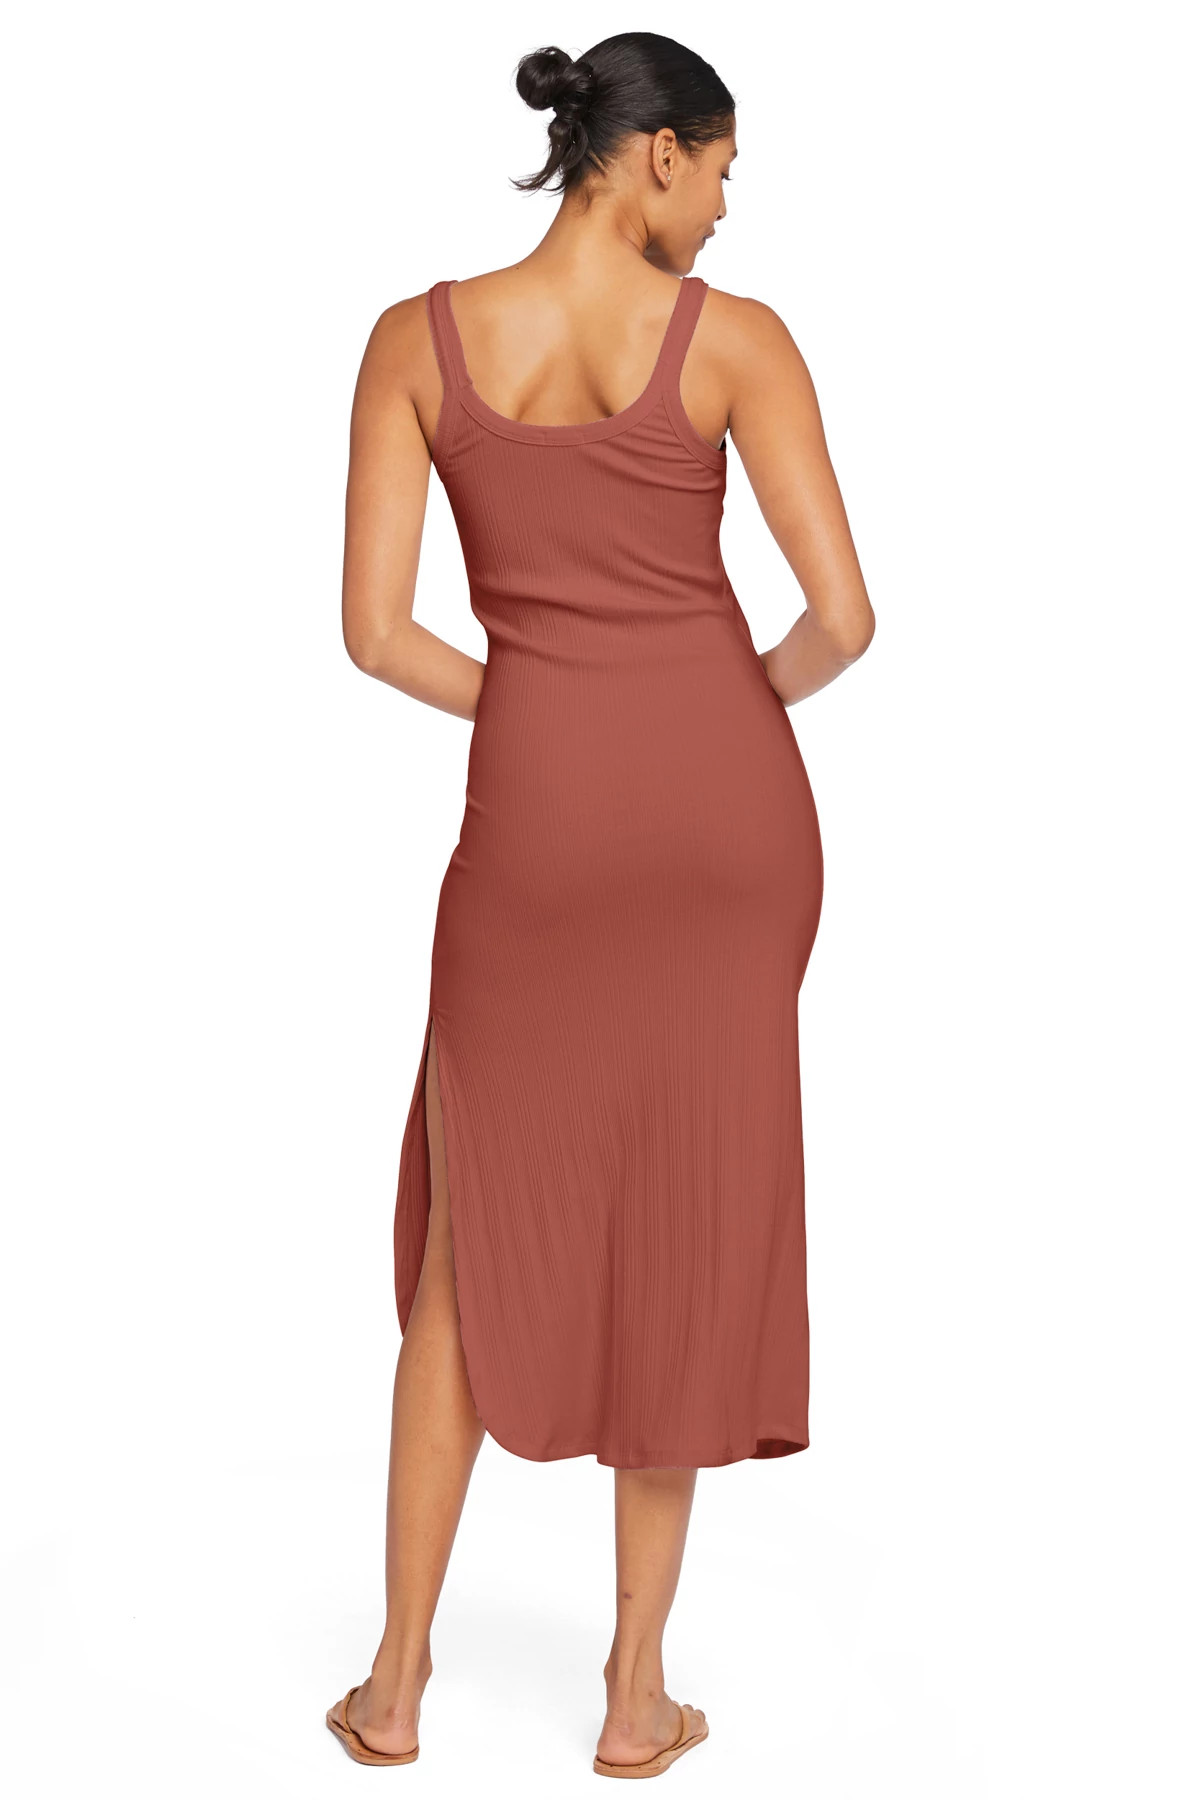 COPPER ORGANIC West Ribbed Midi Dress image number 2